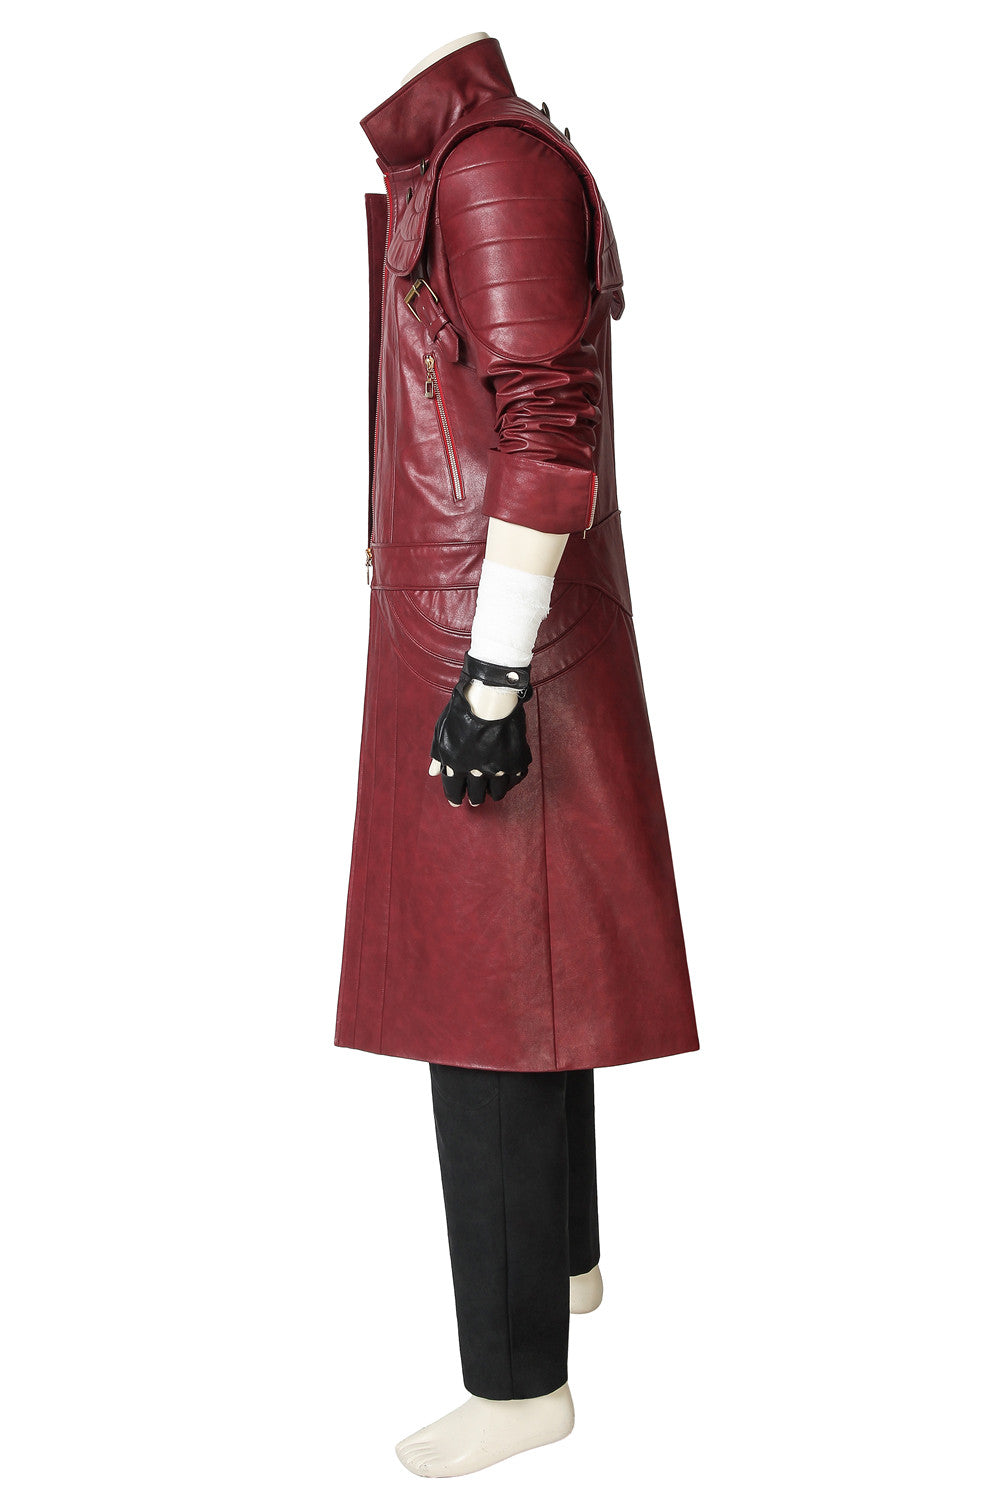 Devil May Cry 5 Devil Hunter Dante Cosplay Costume – AAACosplay